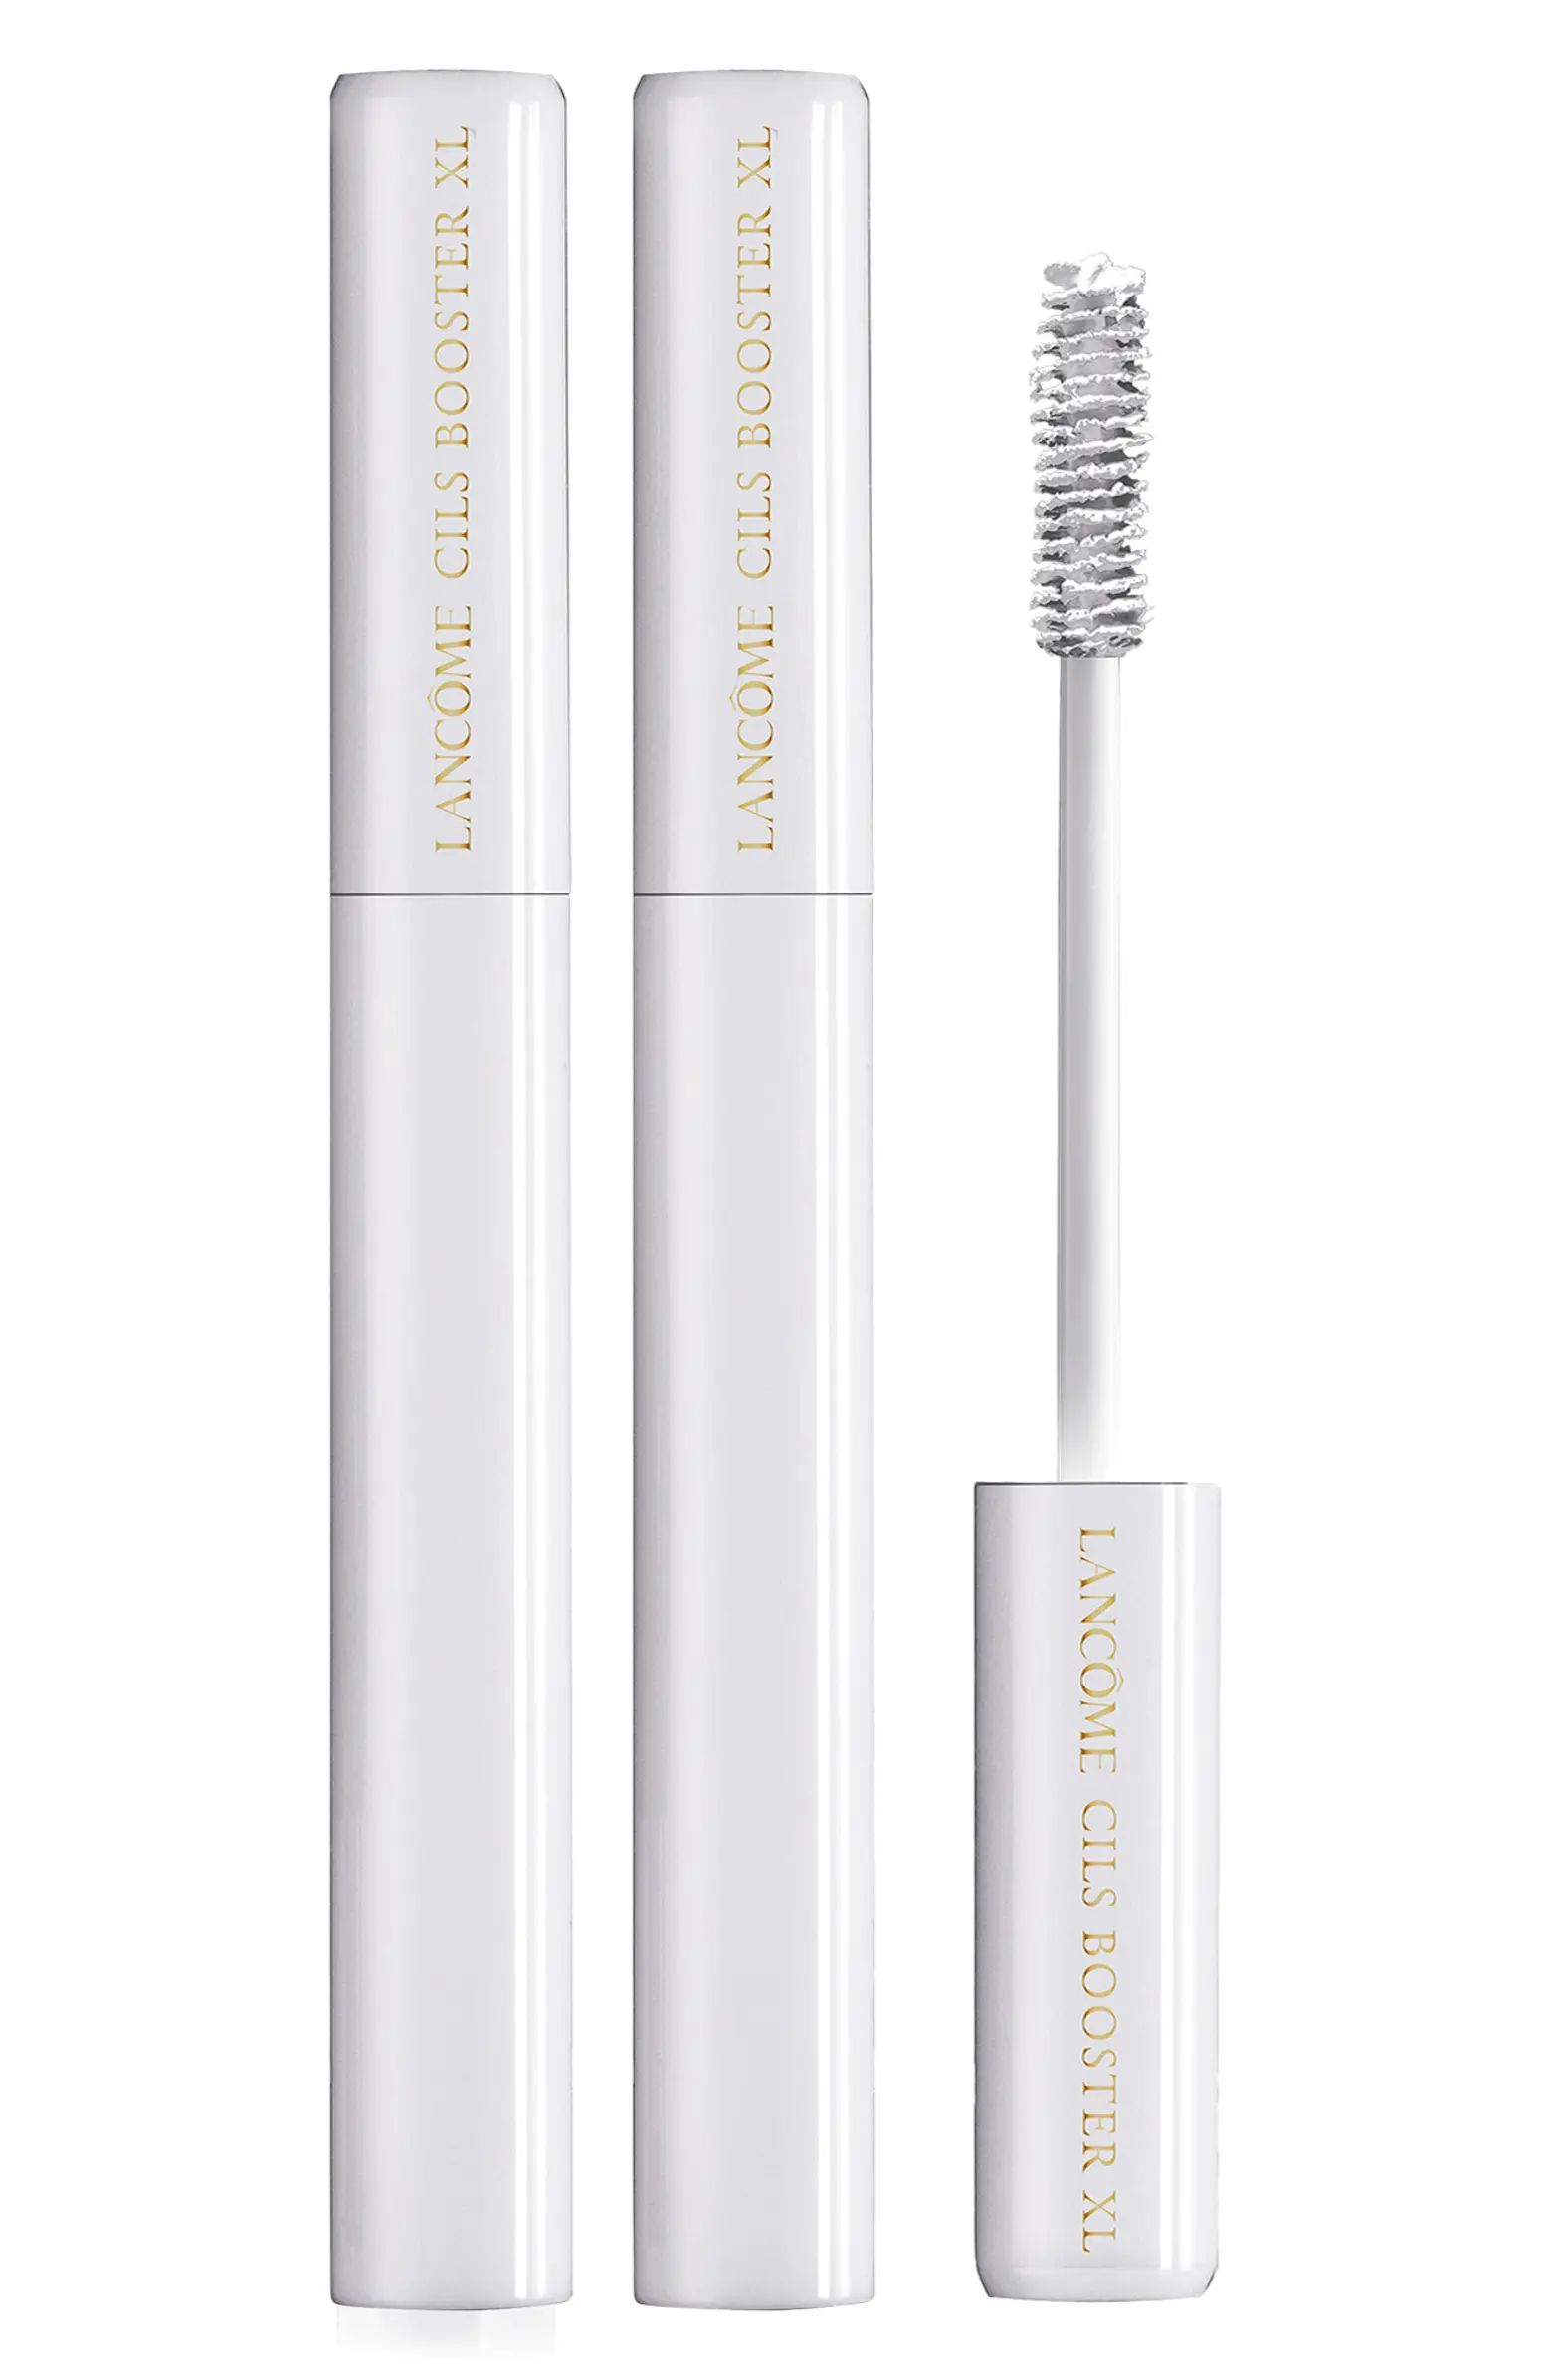 Cils Booster XL Vitamin-Infused Mascara Primer Duo Set USD $60 Value | Nordstrom